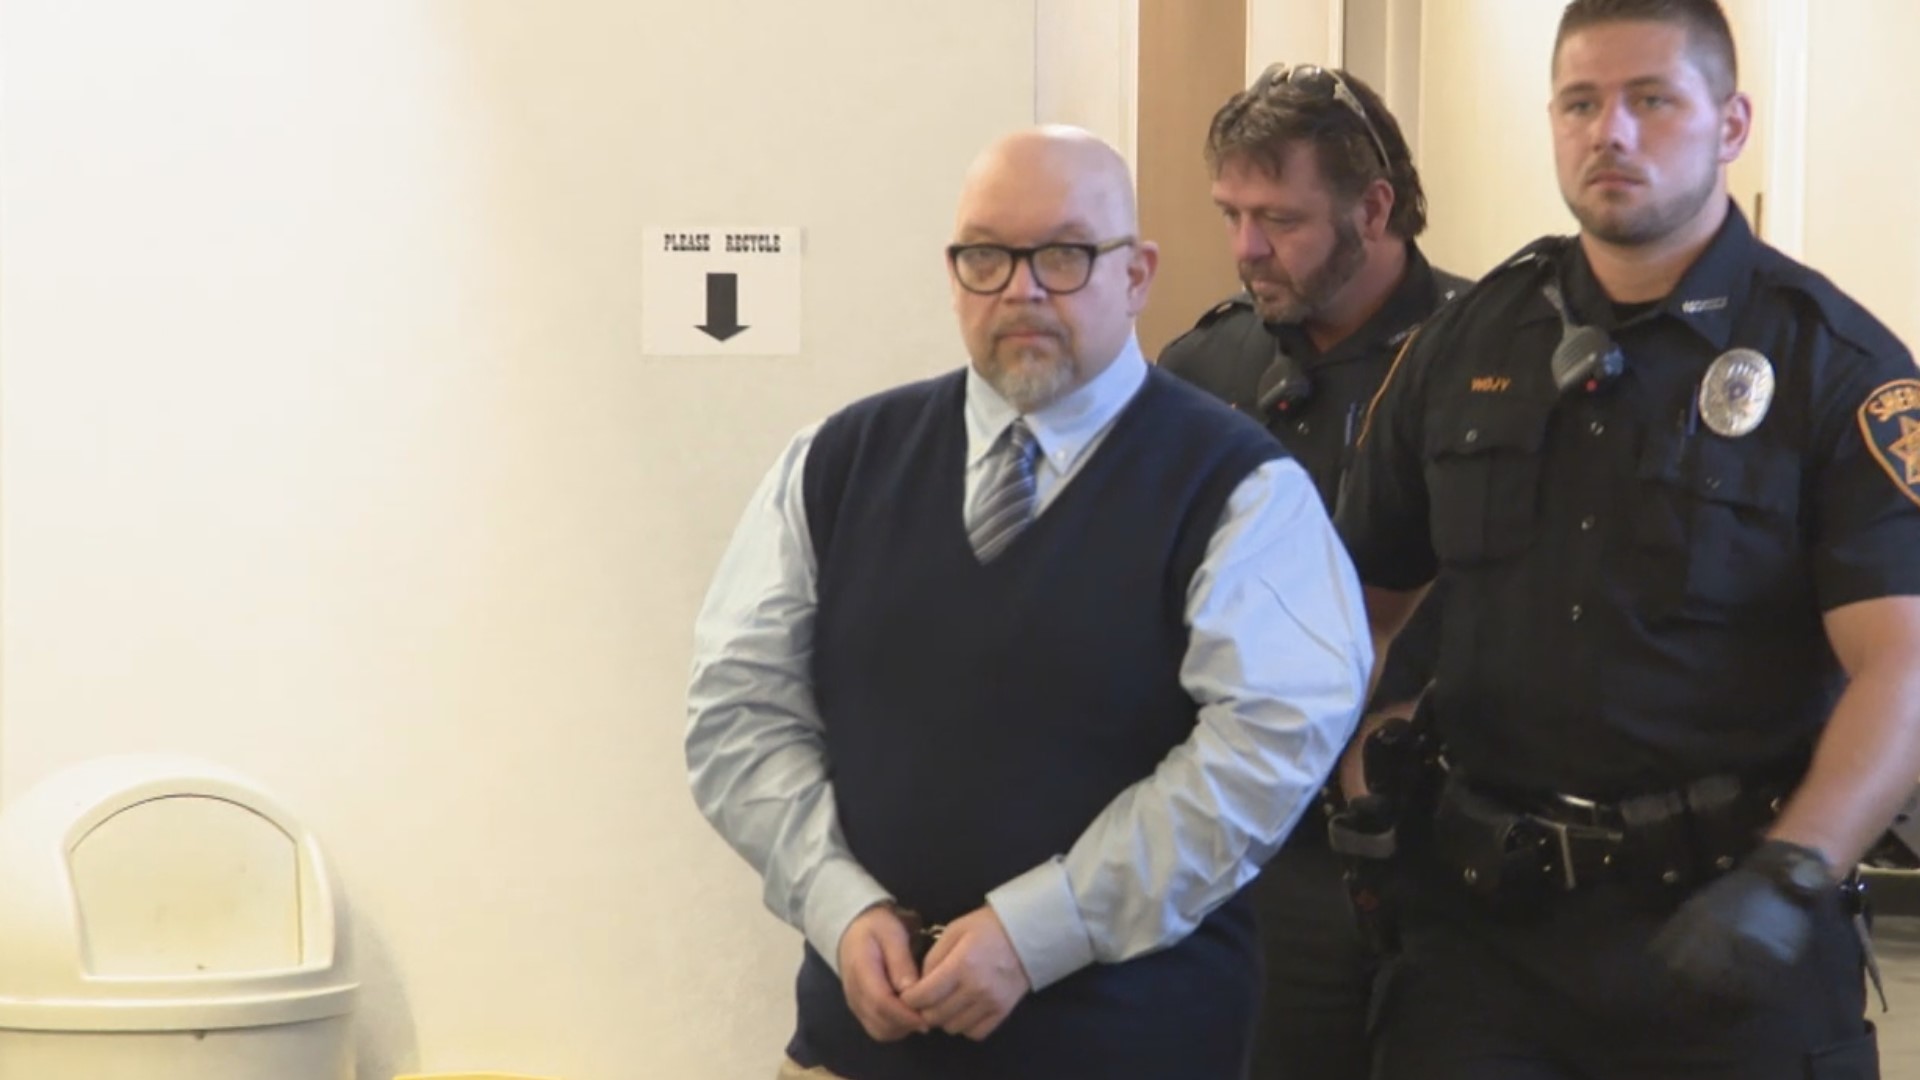 Michael Horvath is charged with criminal homicide and kidnapping. The judge has up to seven days to render a verdict.